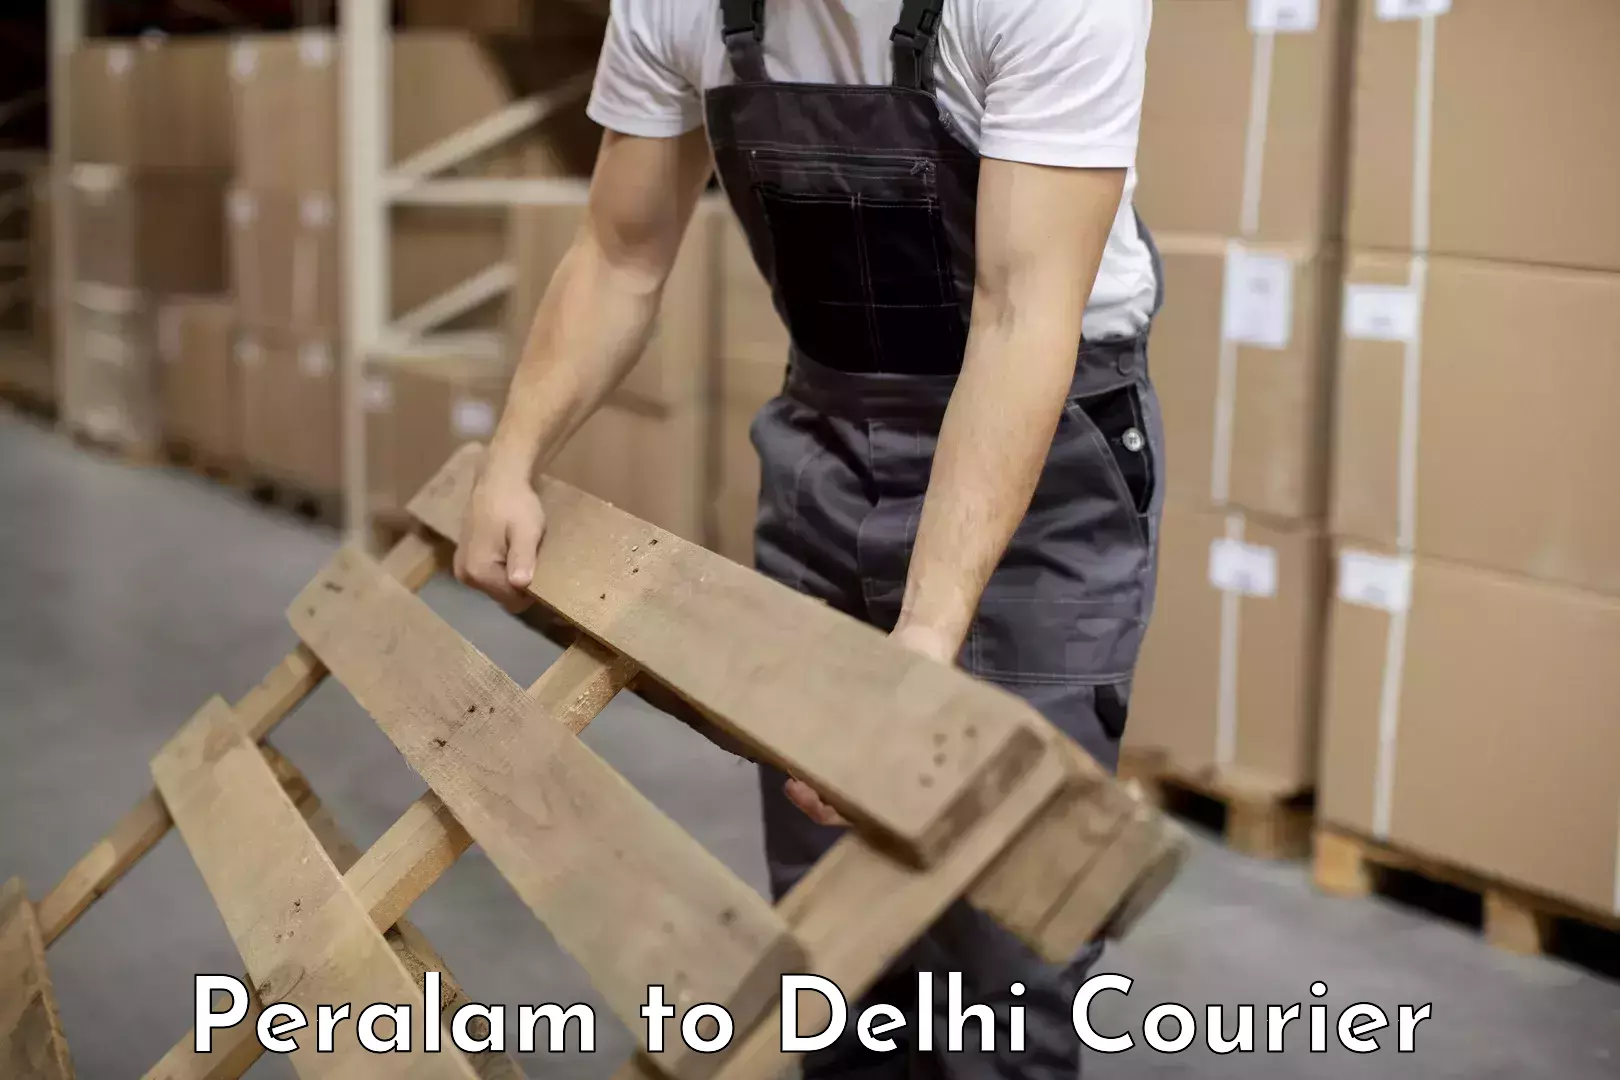 Professional moving assistance Peralam to University of Delhi